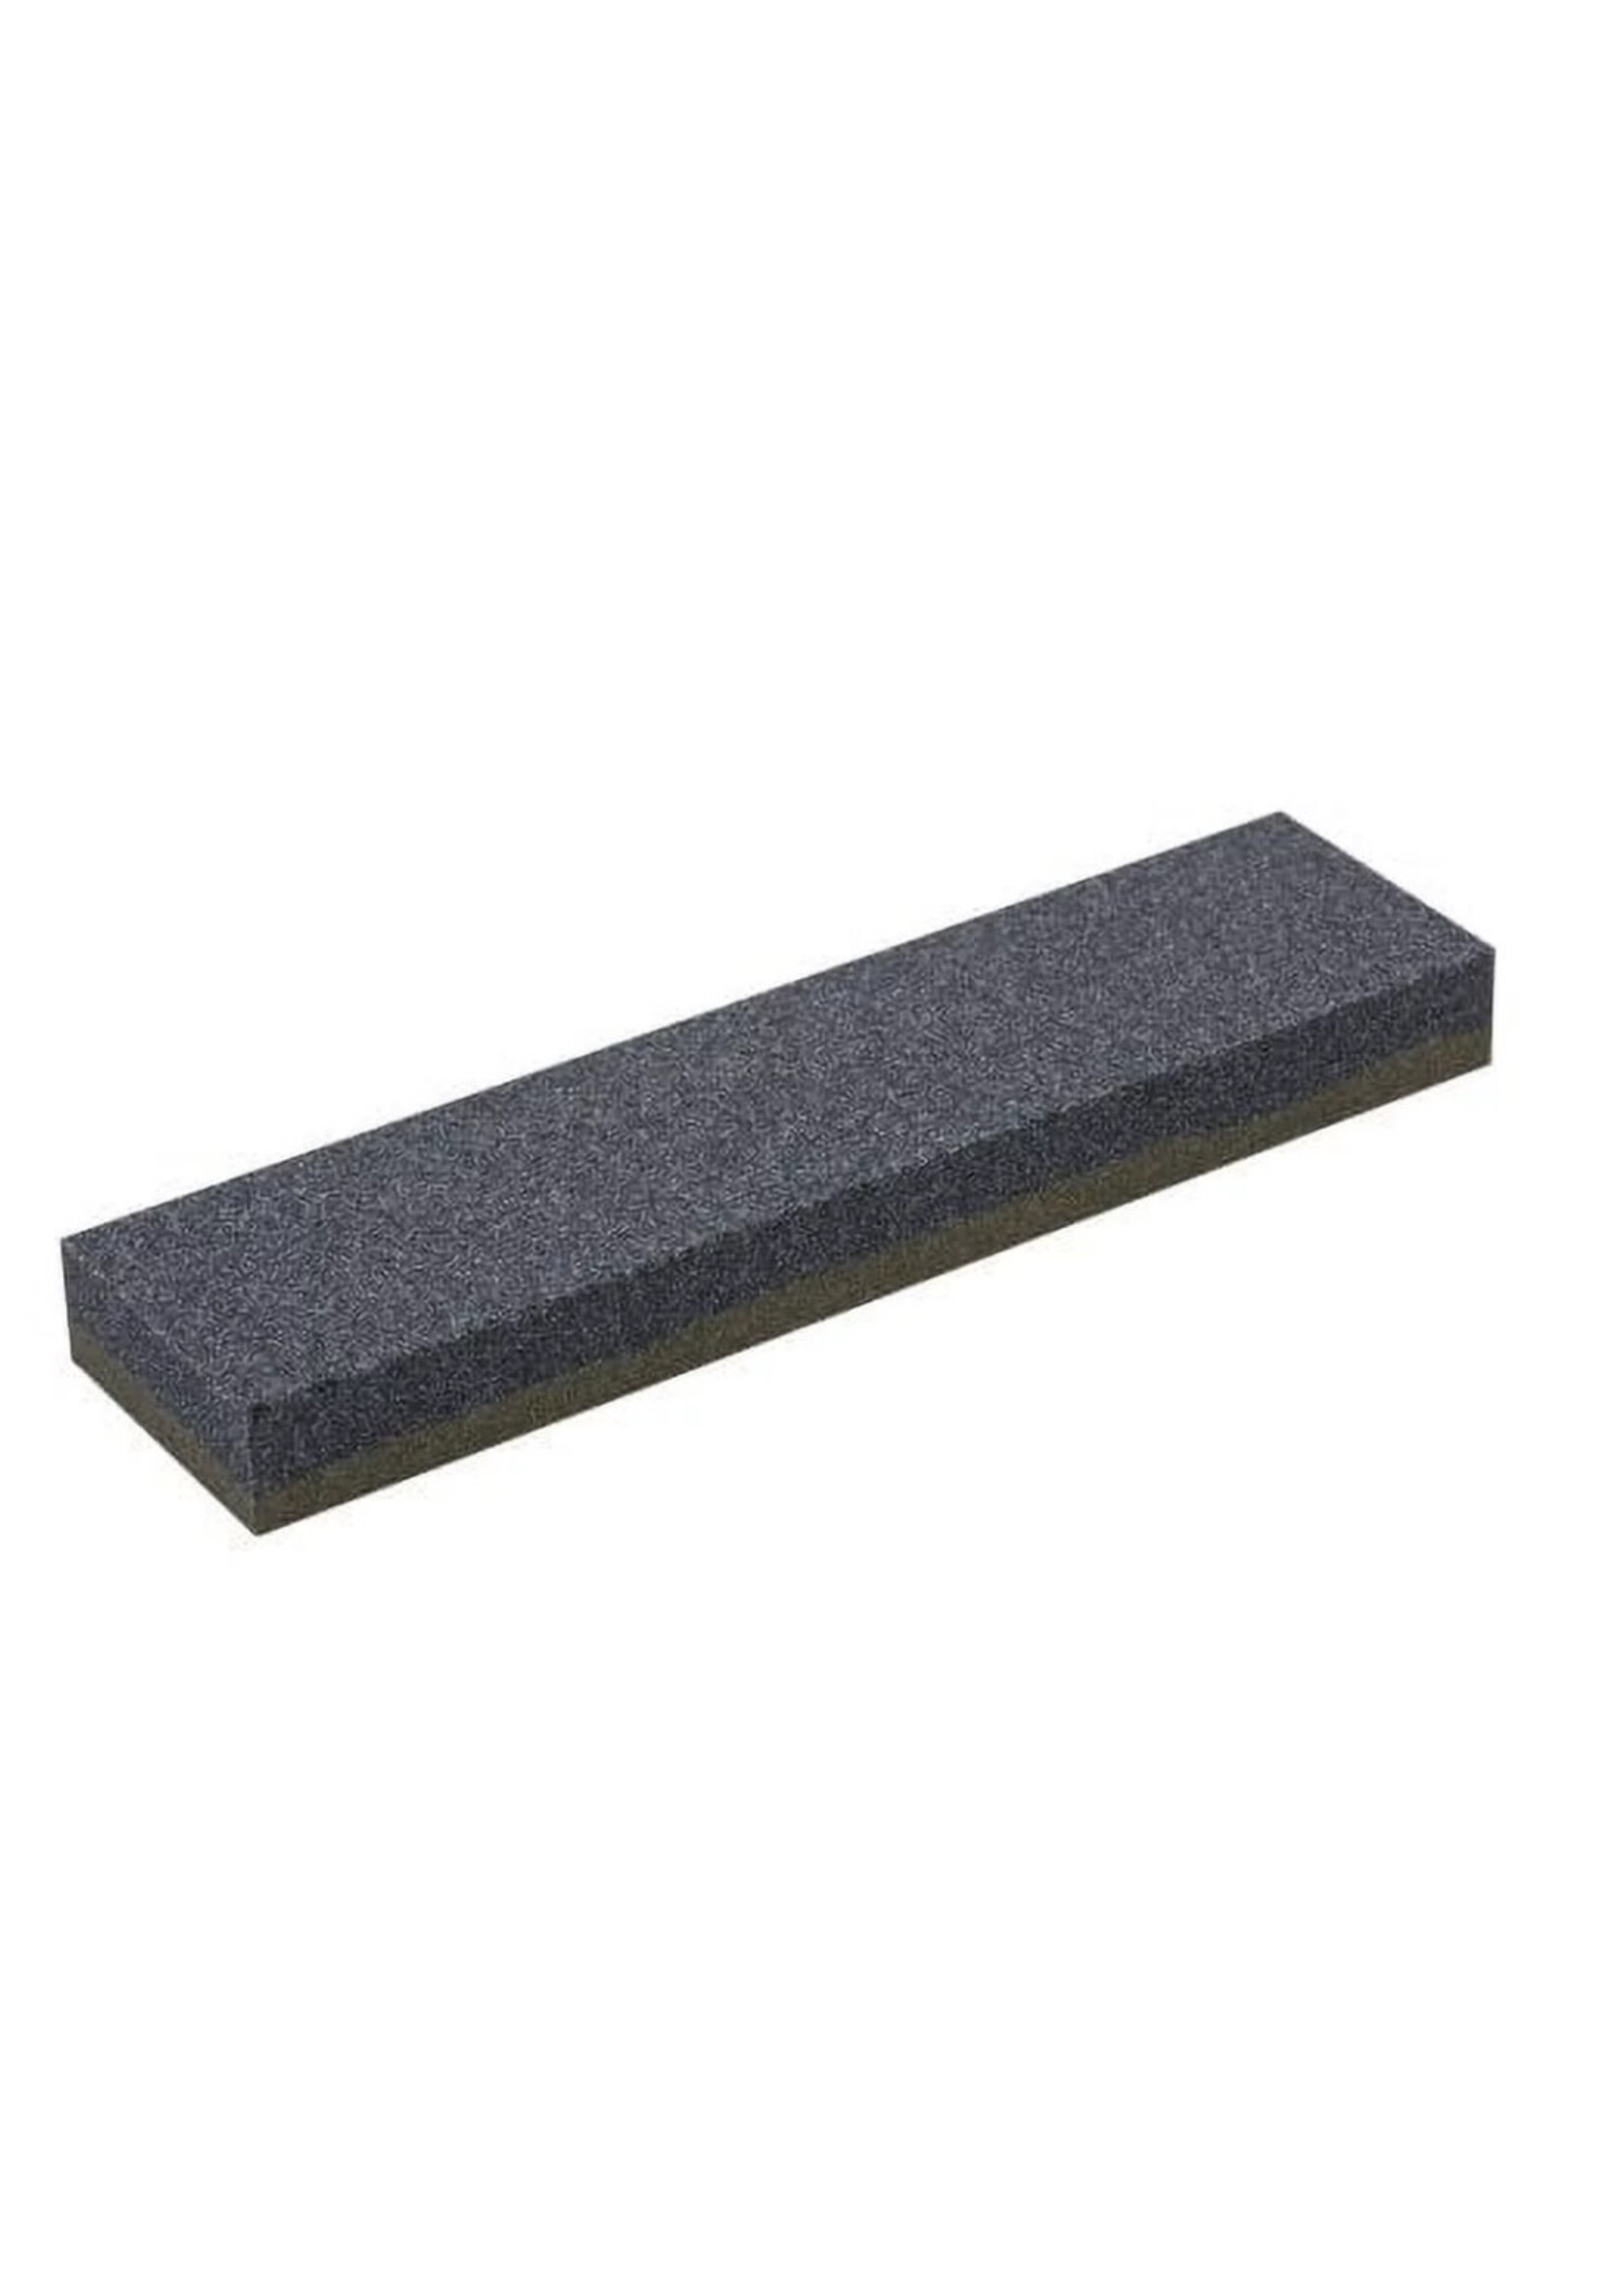 SMITH’S 4” DUAL GRIT SHARPENING STONE